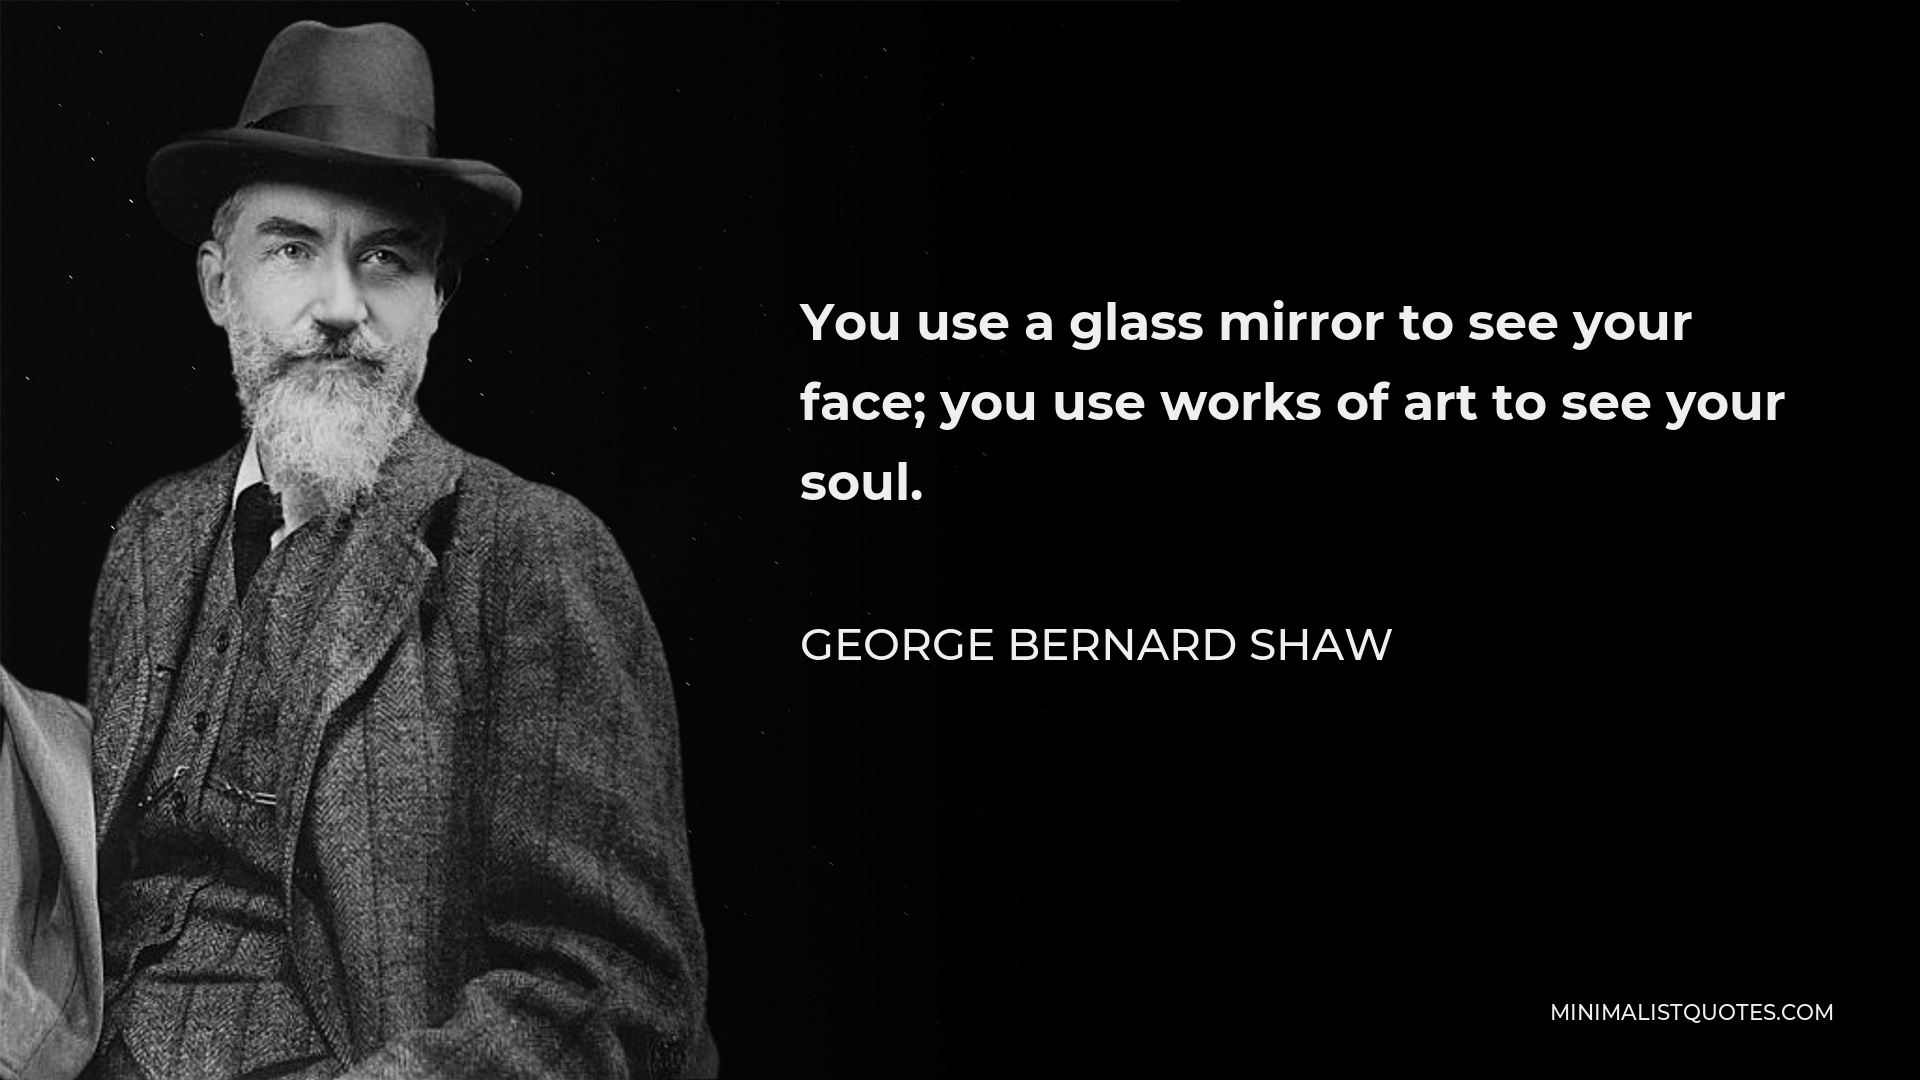 George Bernard Shaw Quote - You use a glass mirror to see your face; you use works of art to see your soul.